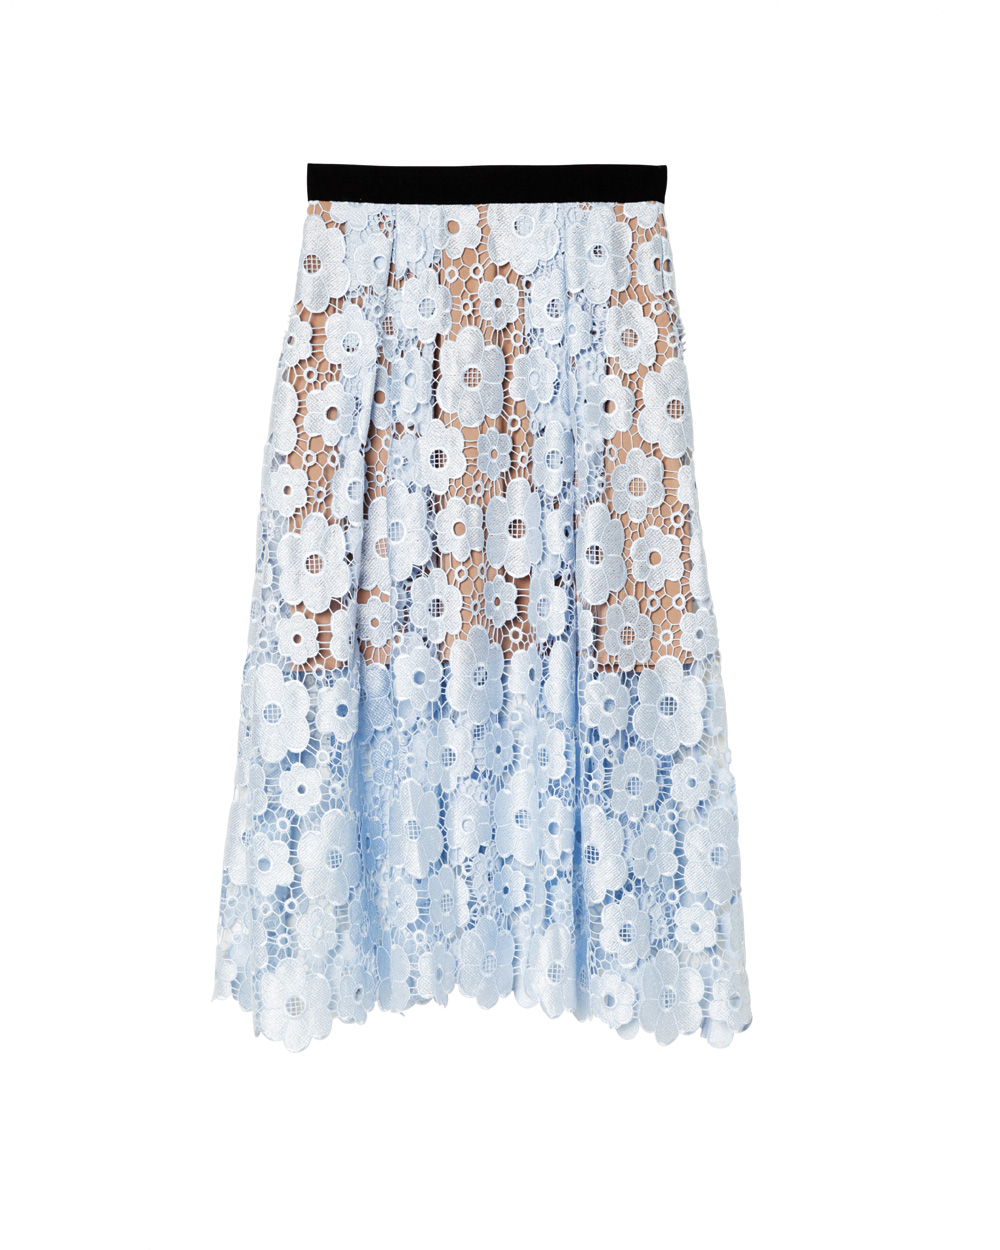 Self Portrait skirt, $395, from Muse